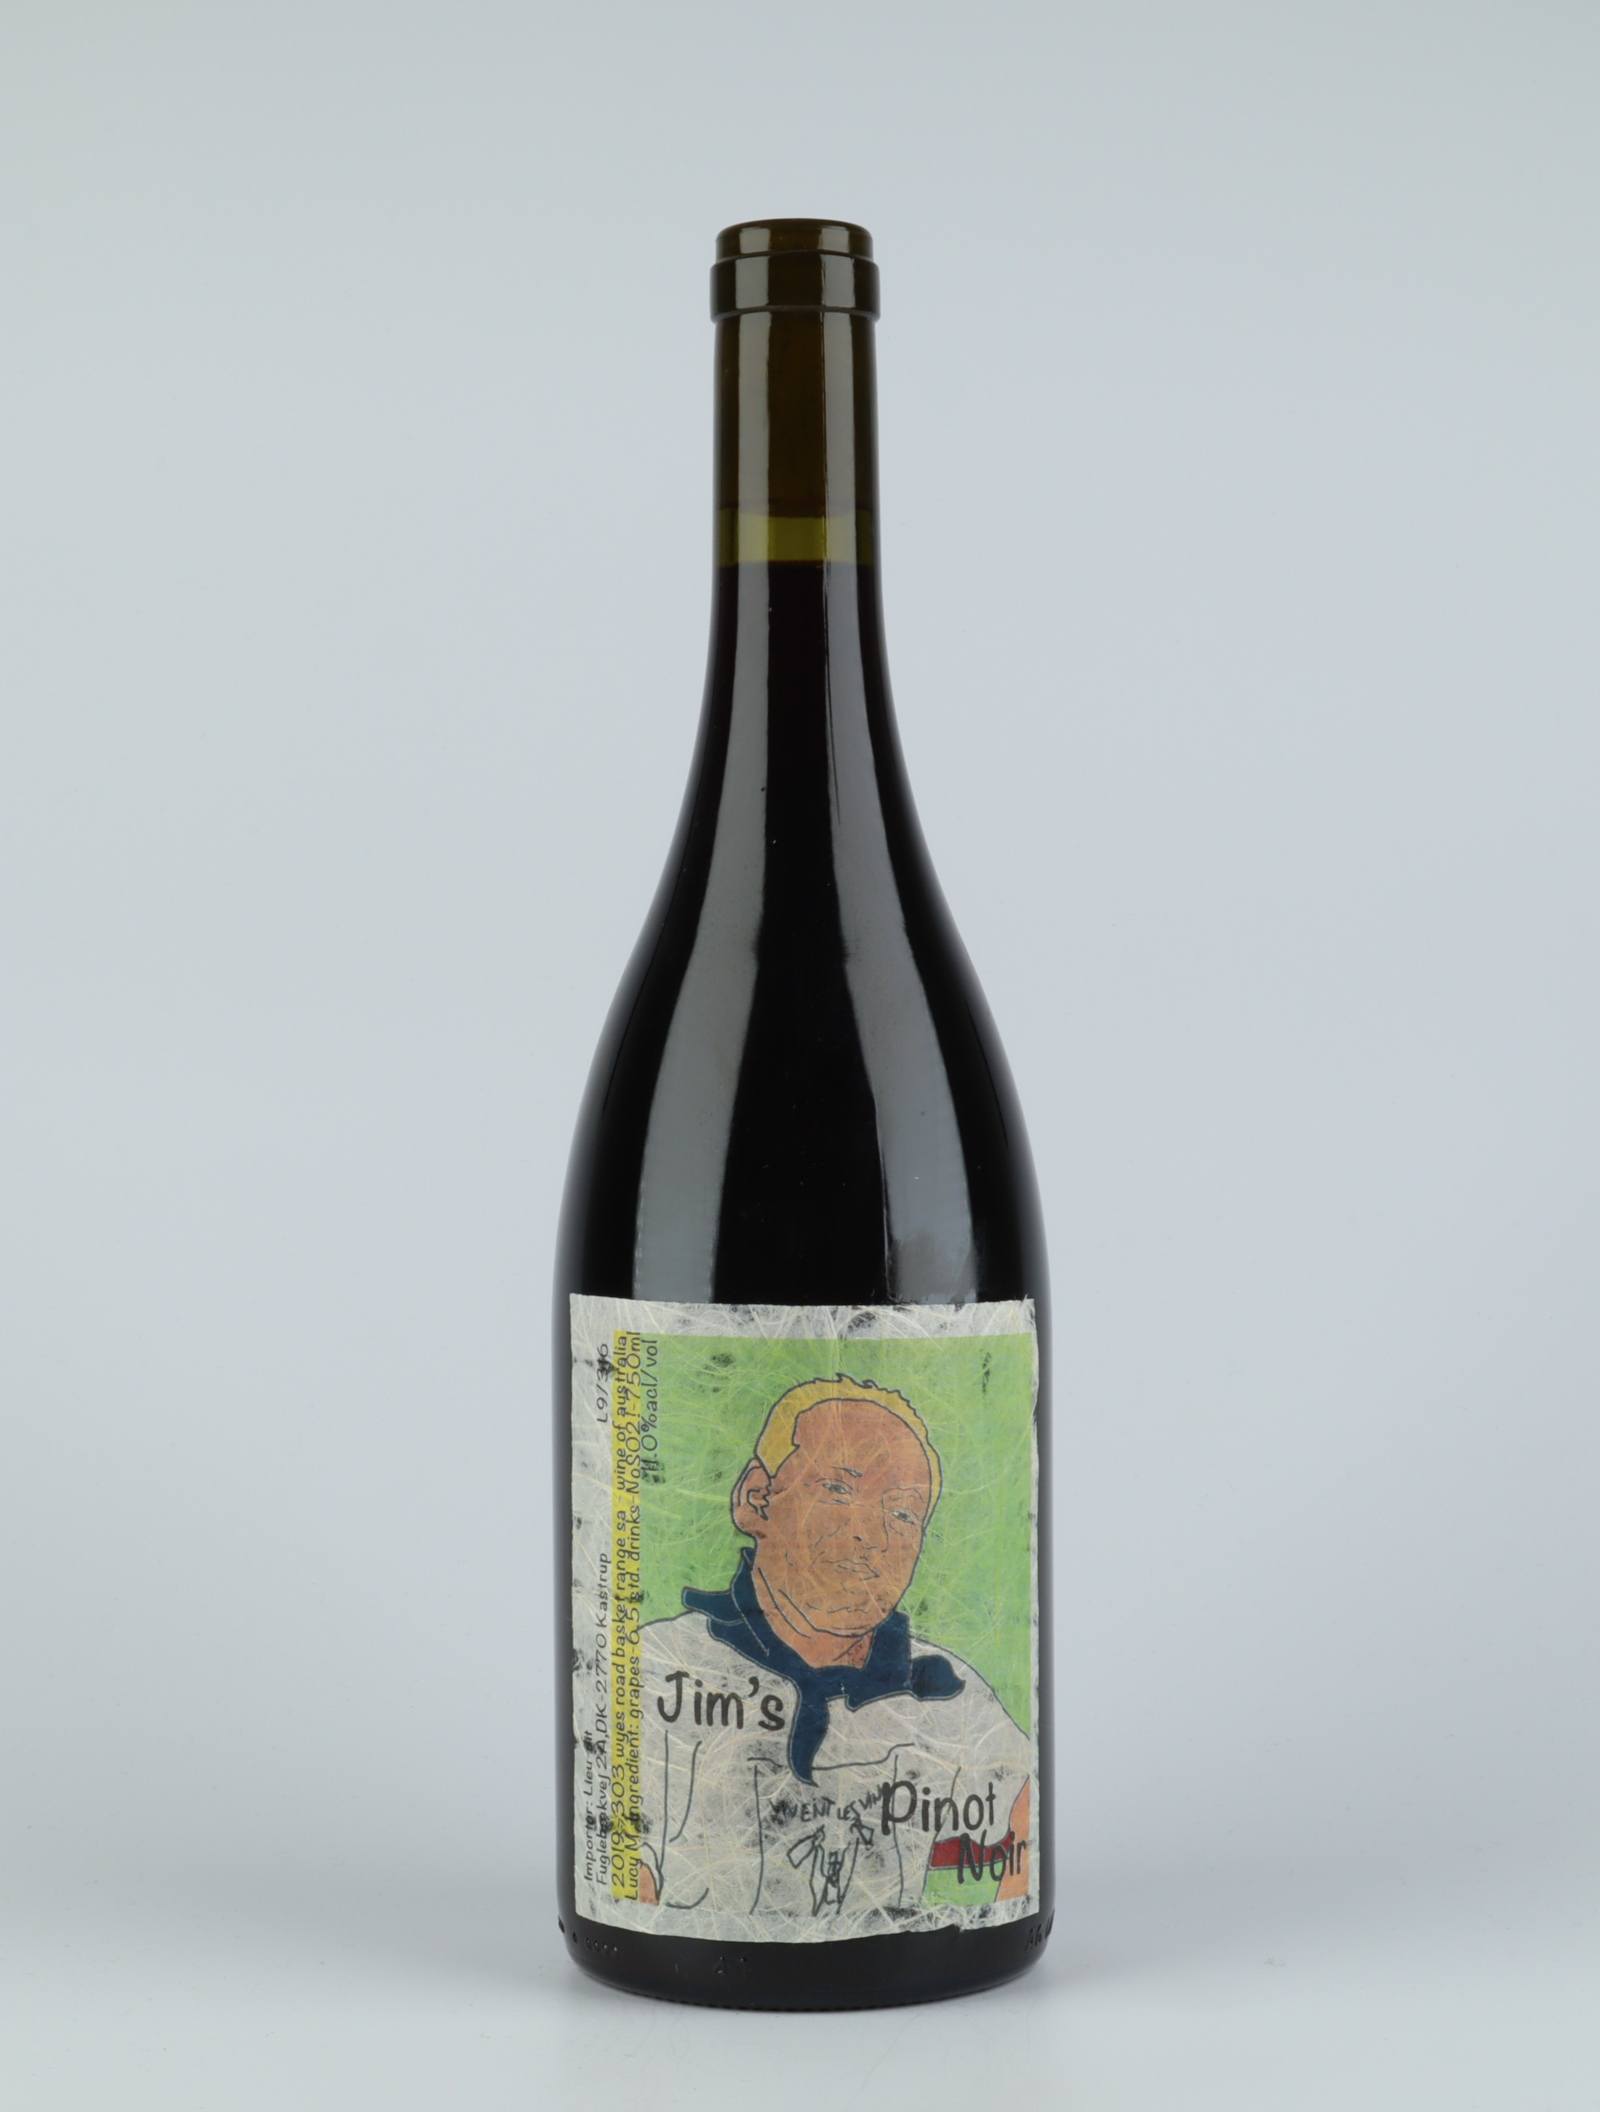 A bottle 2019 Jim's Pinot noir Red wine from Lucy Margaux, Adelaide Hills in Australia